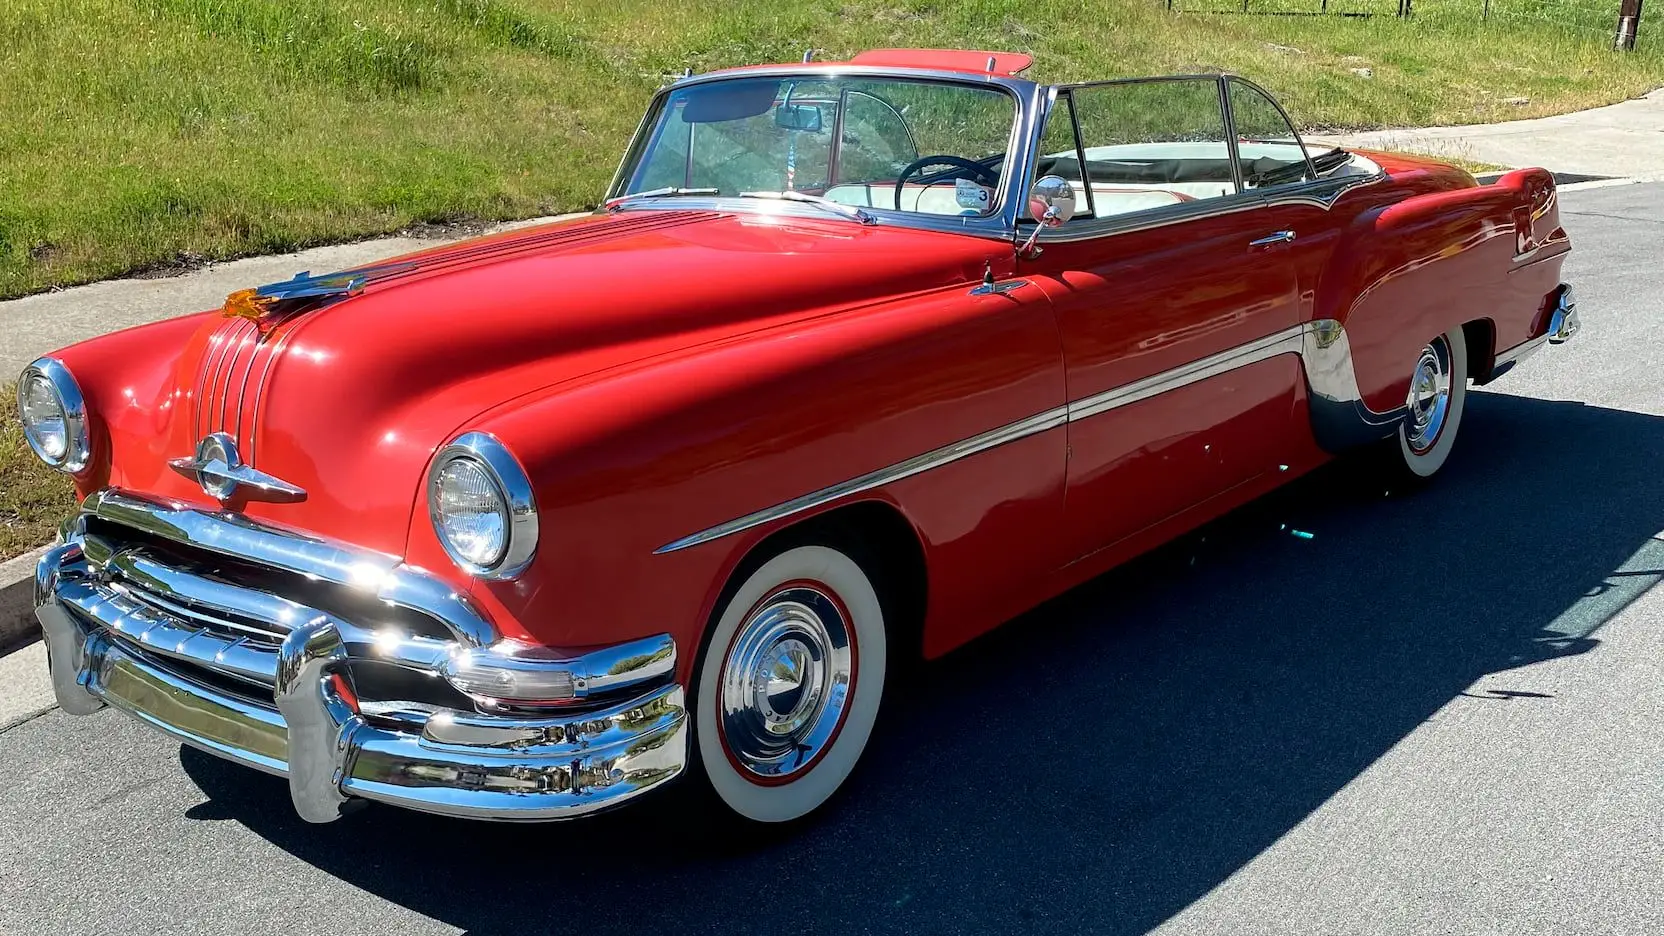 Introduction to the 1954 Pontiac Chieftain